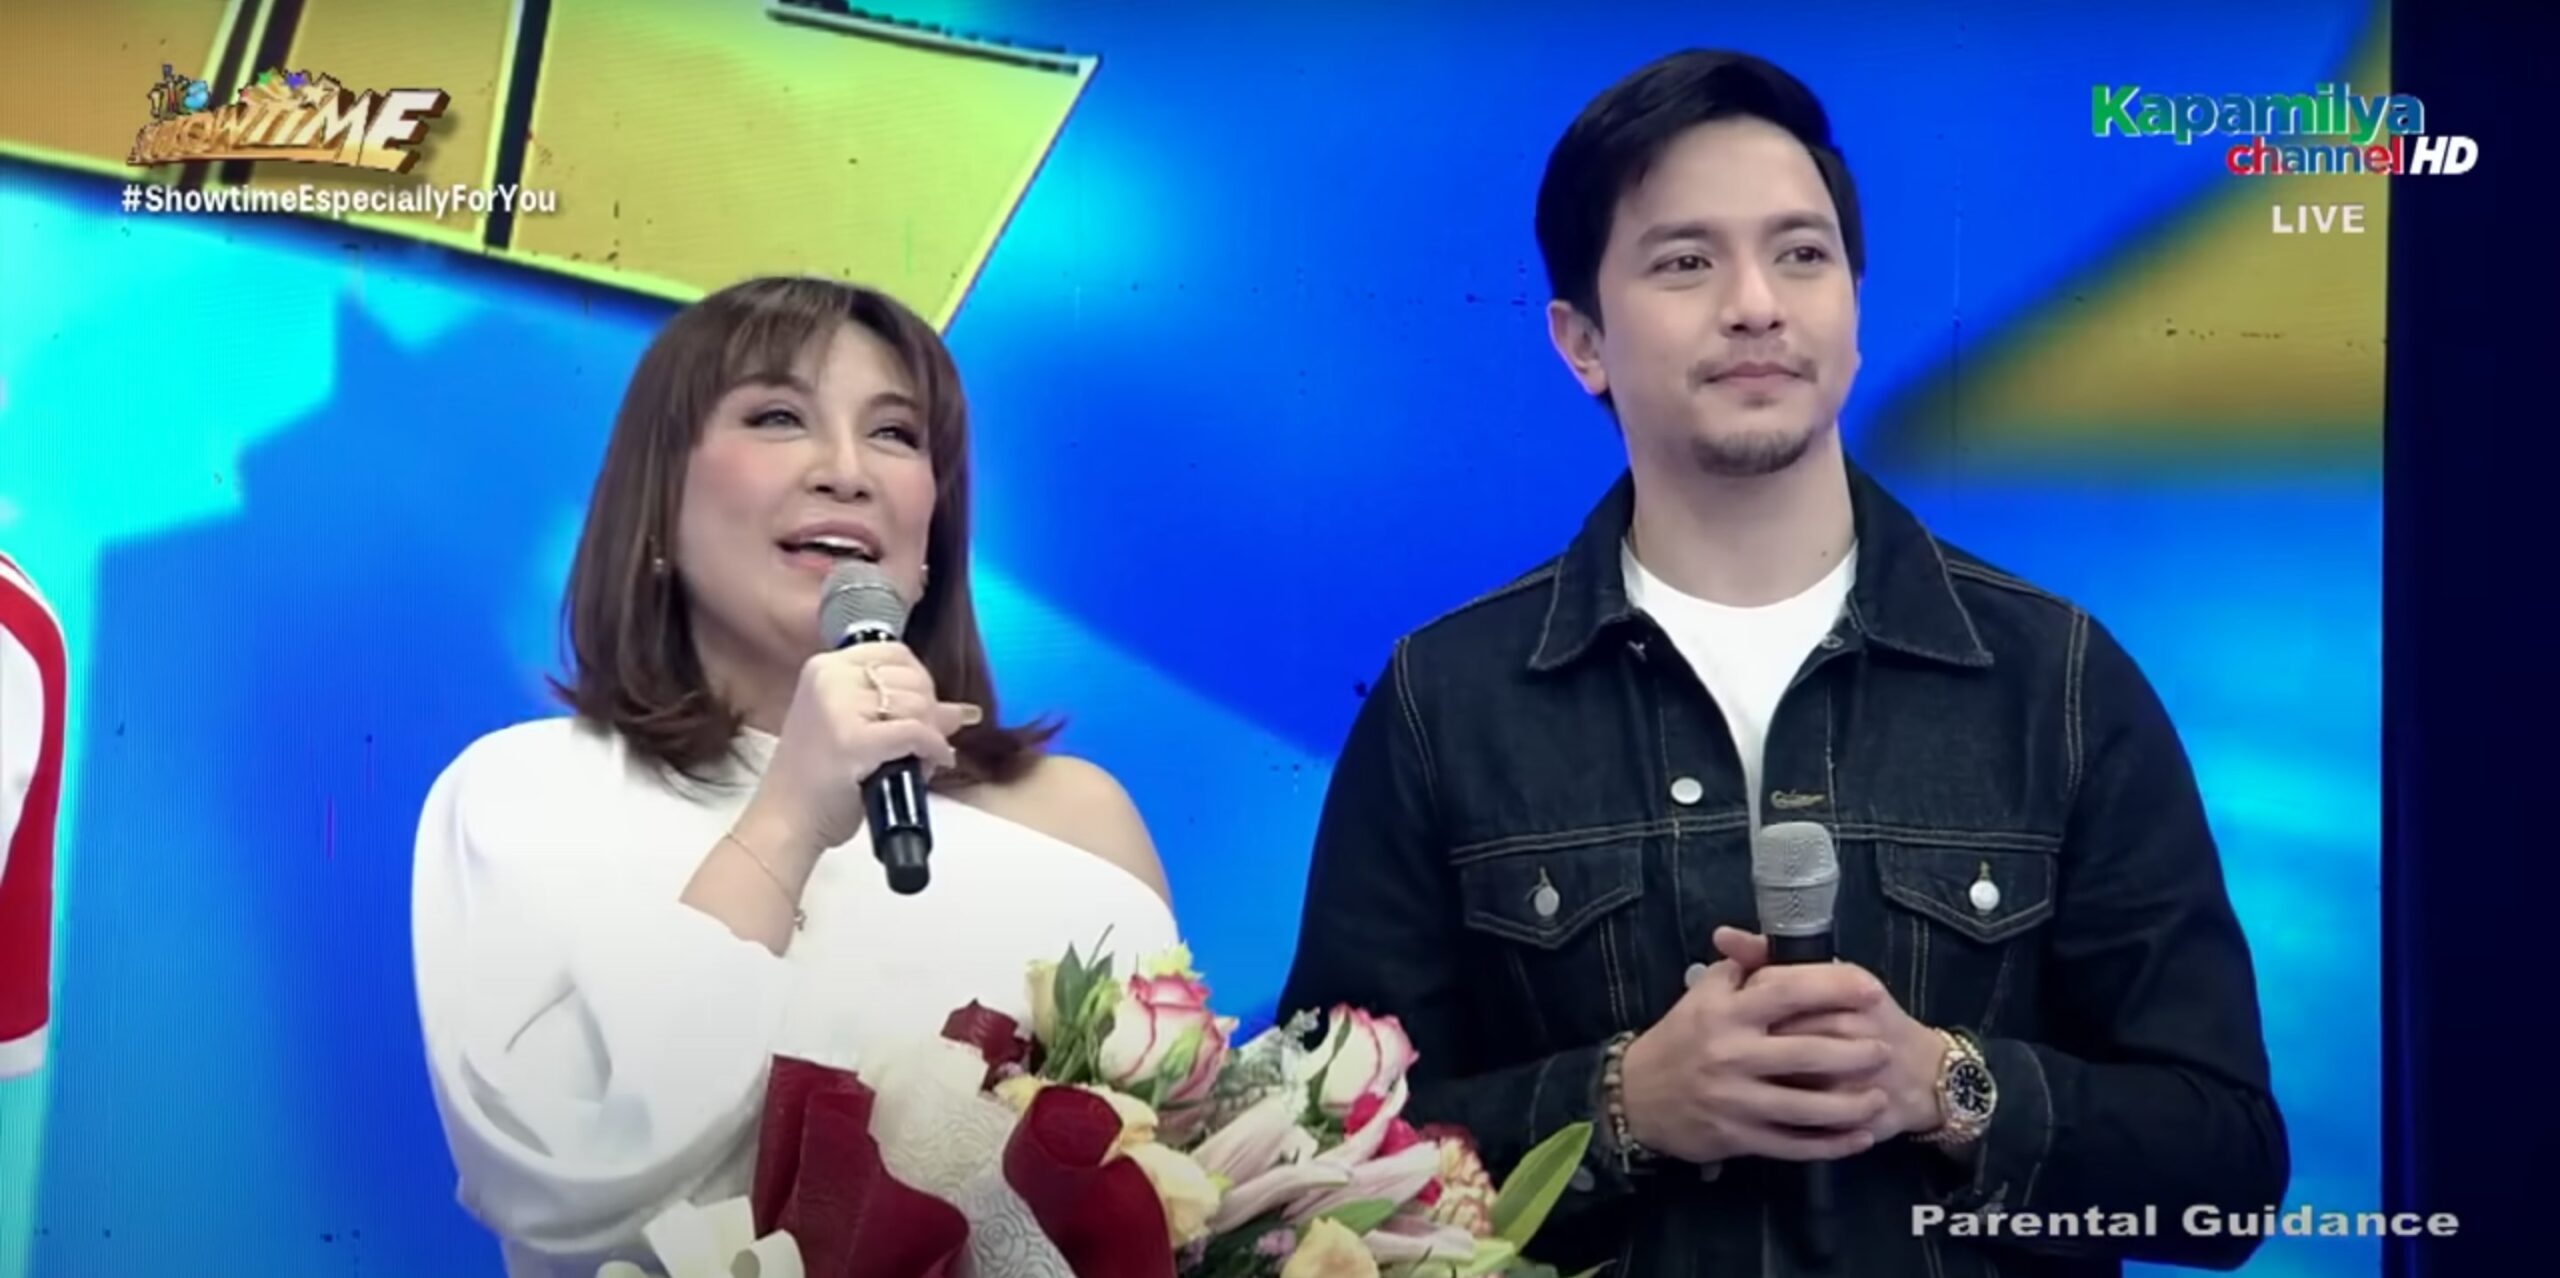 LOOK: Alden Richards appears on ‘It’s Showtime’ with Sharon Cuneta